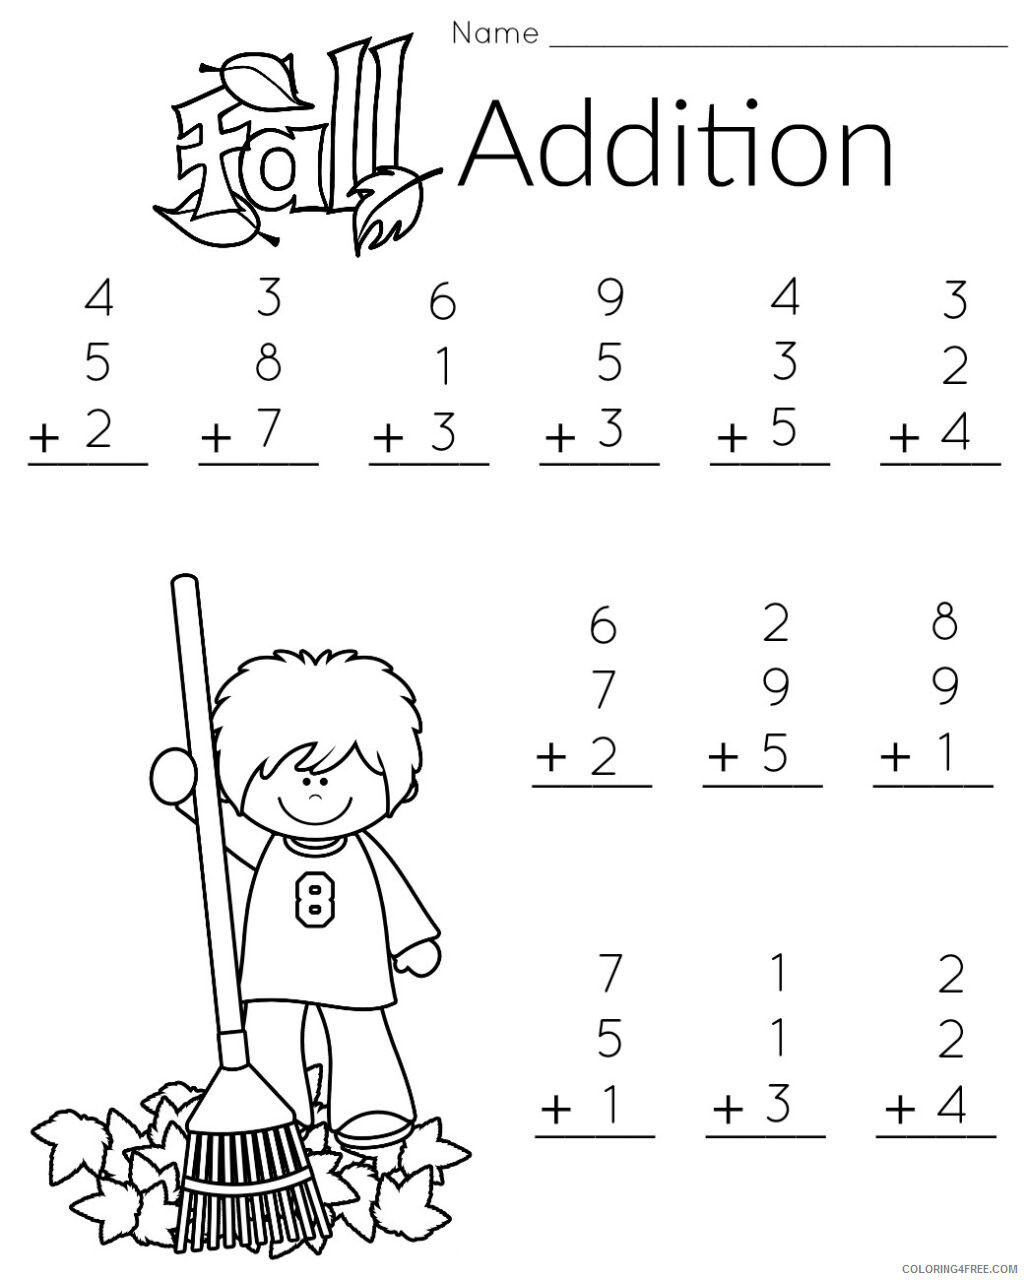 Addition Coloring Pages Educational Kindergarten sheets Math Addition 2020 0573 Coloring4free